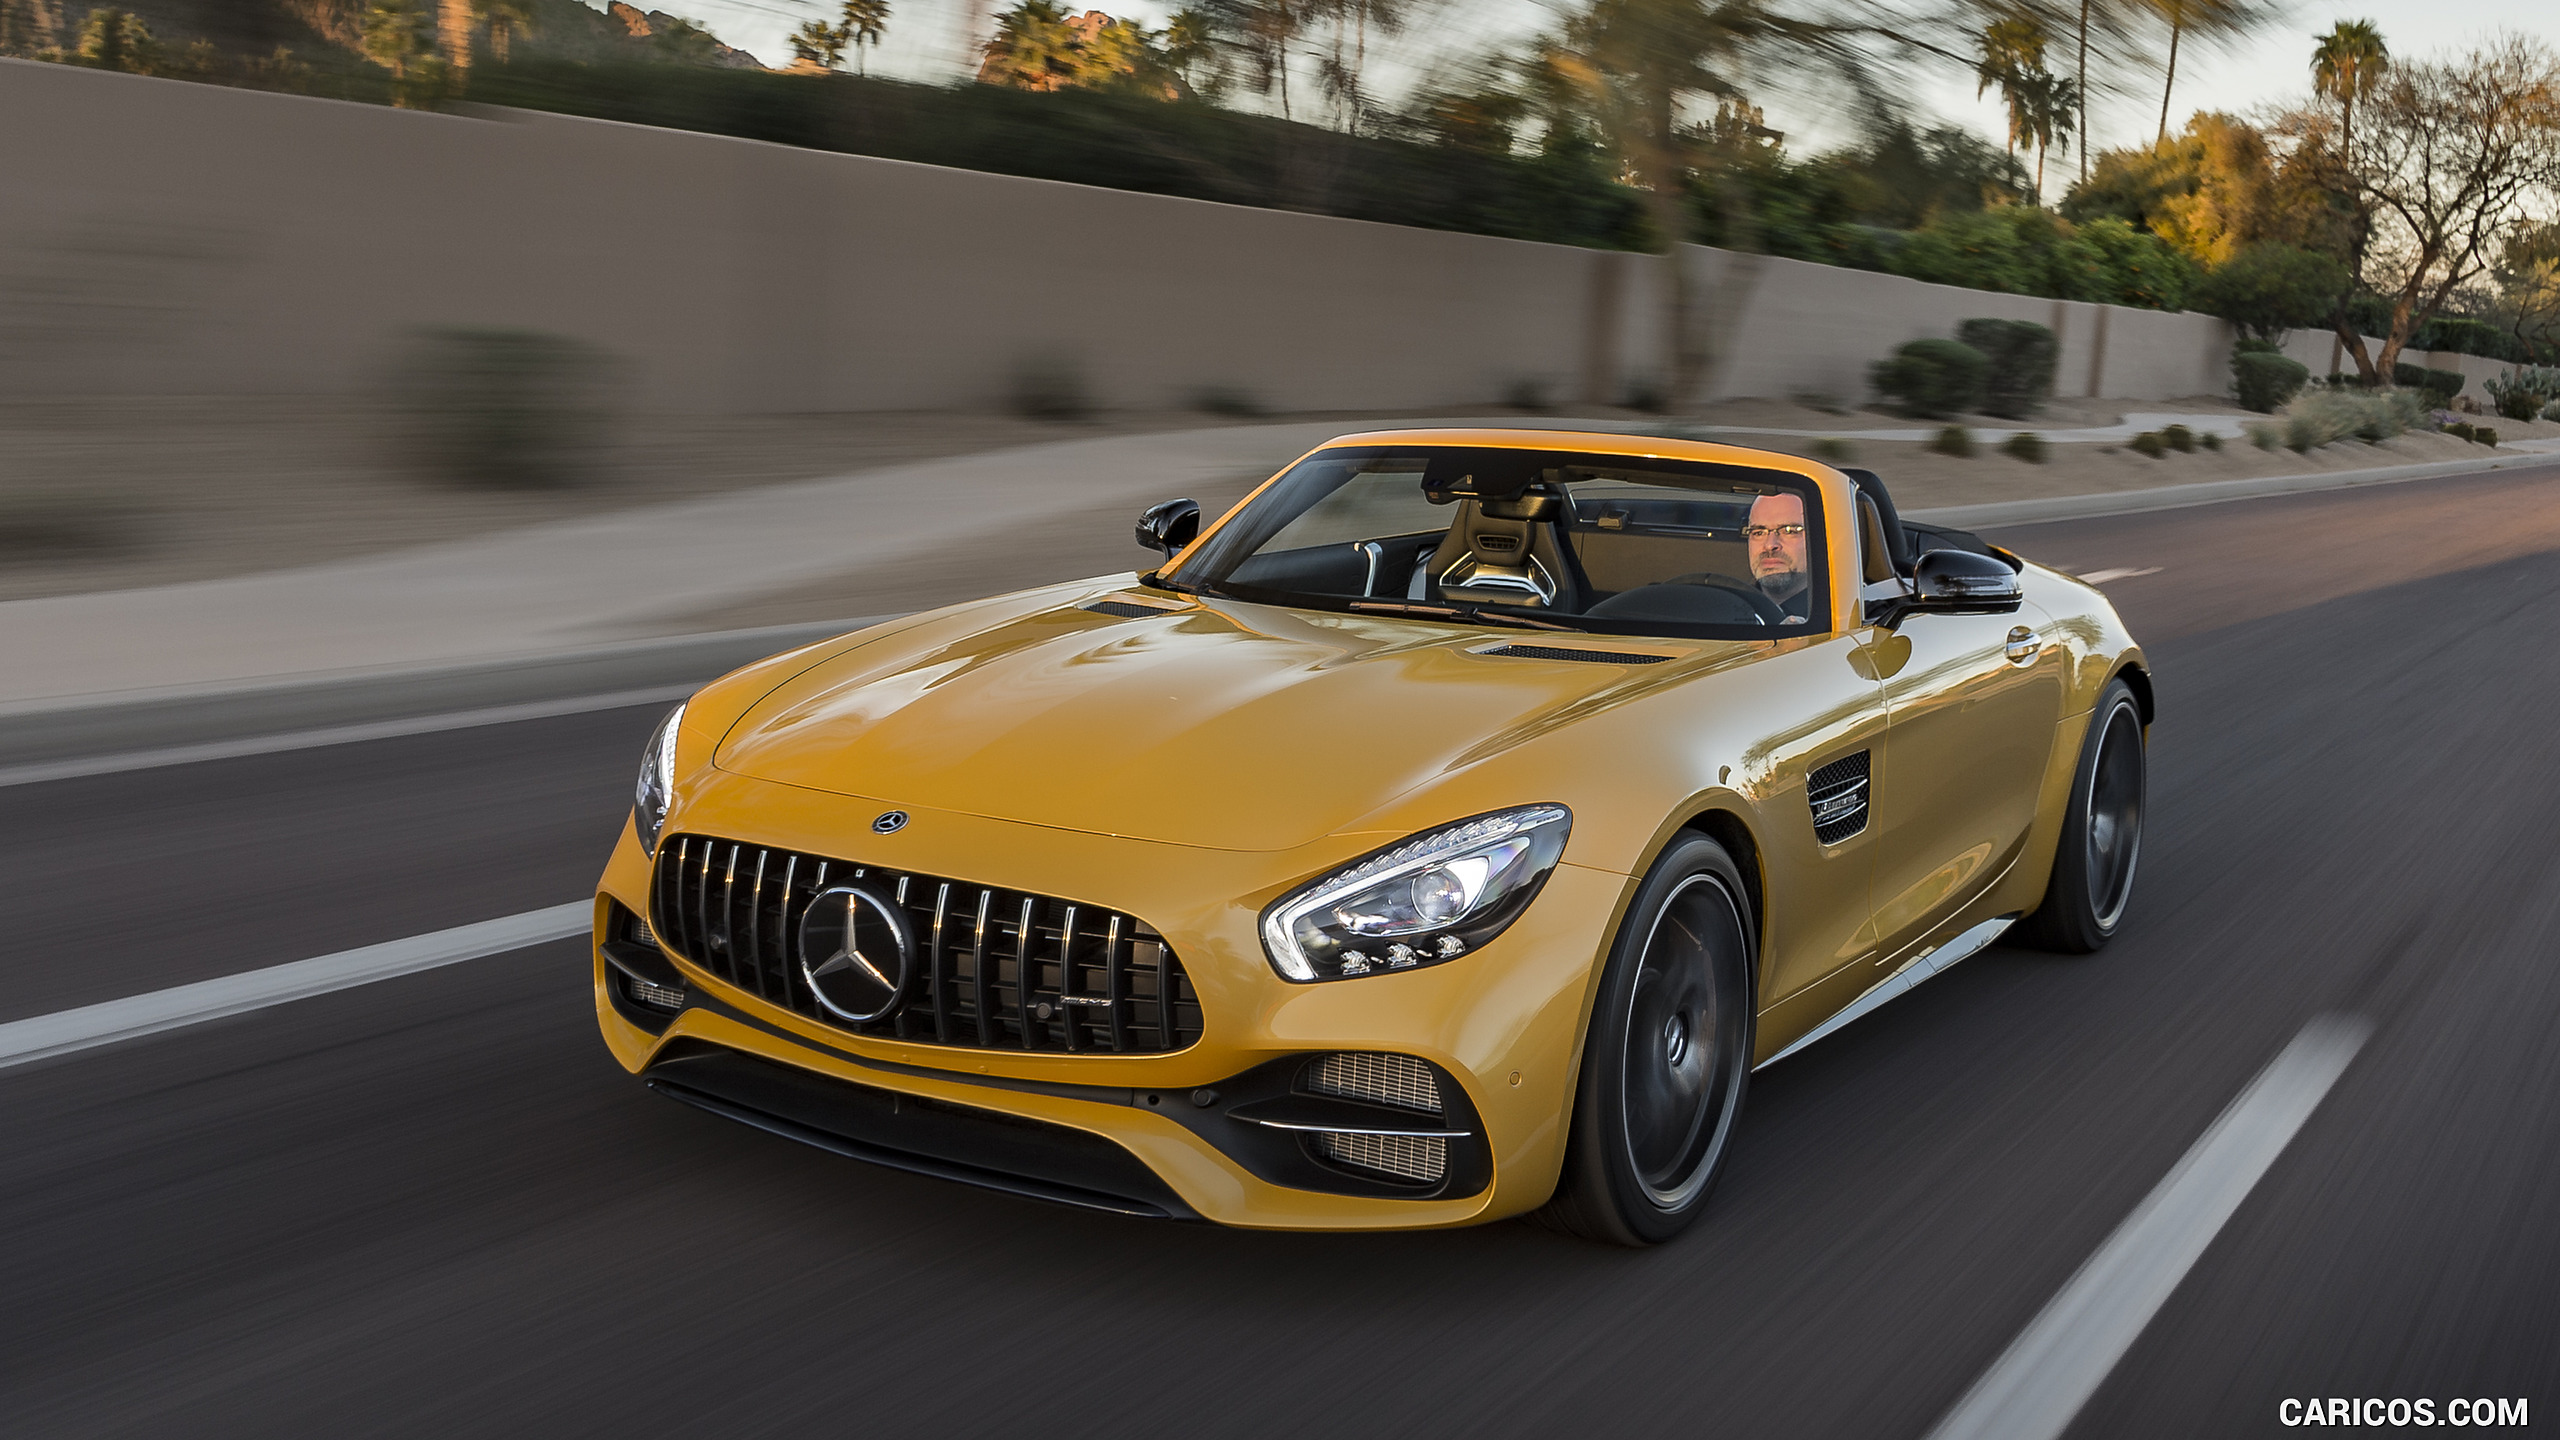 2018 Mercedes-AMG GT C Roadster - Front Three-Quarter, #222 of 350